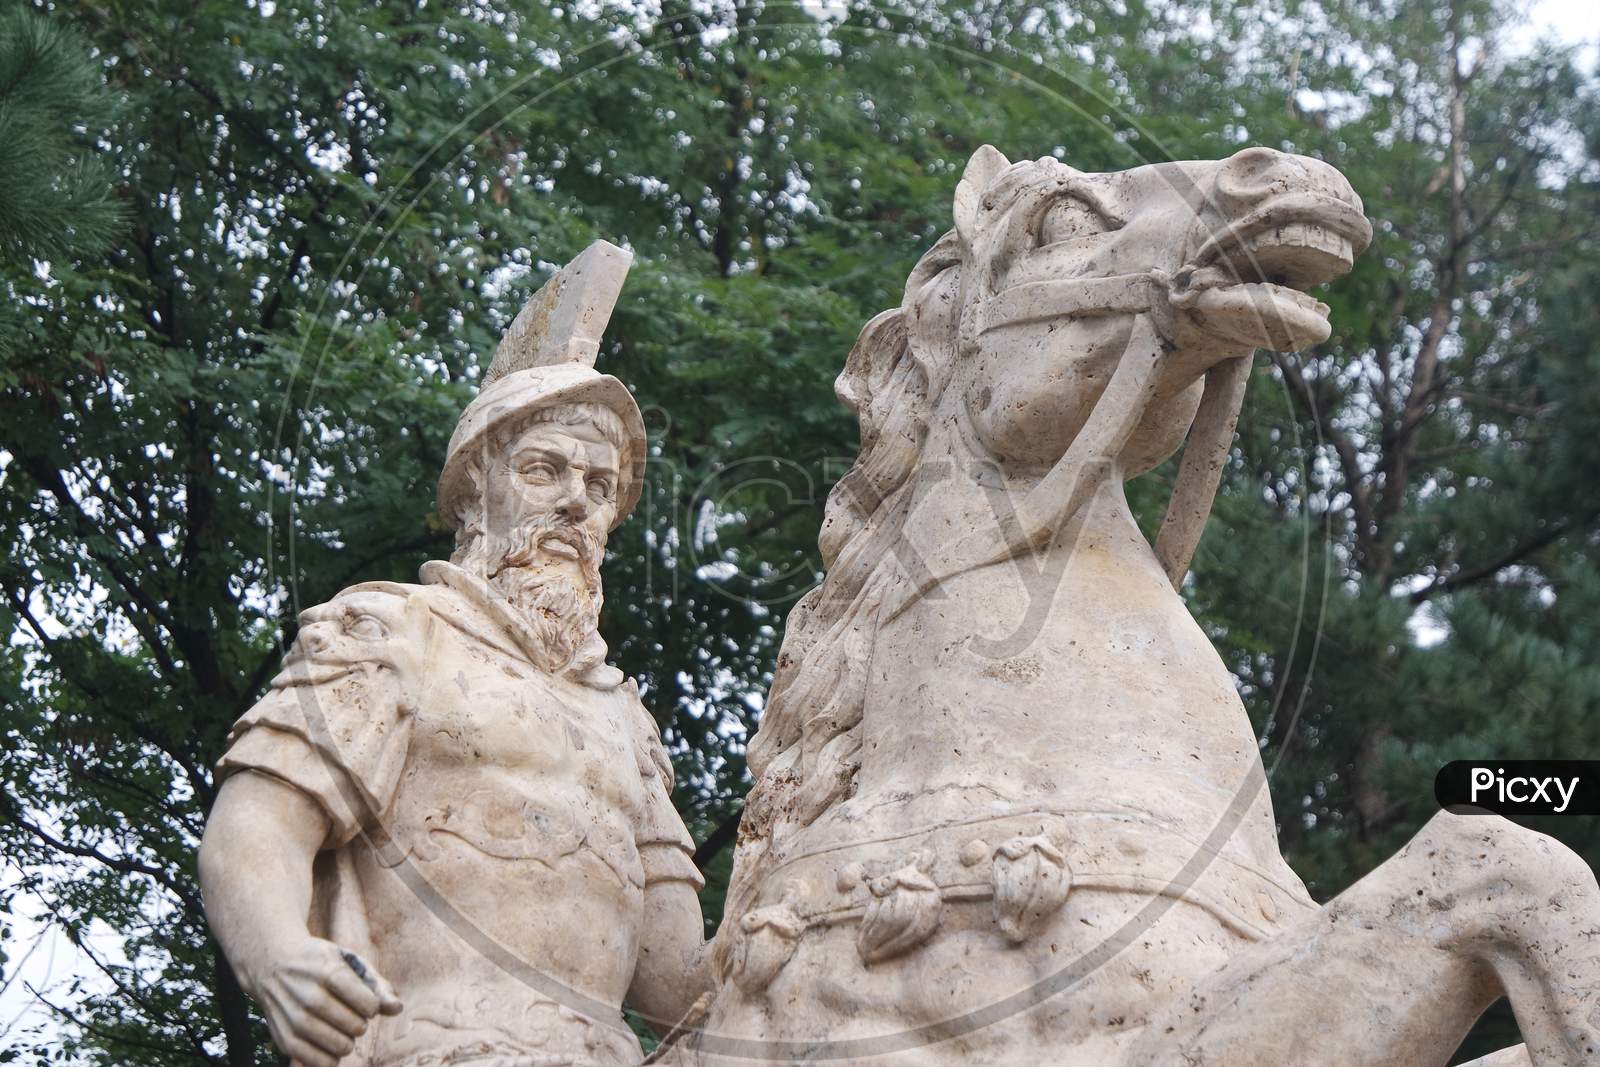 White Marble Statue Of An Ancient Man Riding A Horse